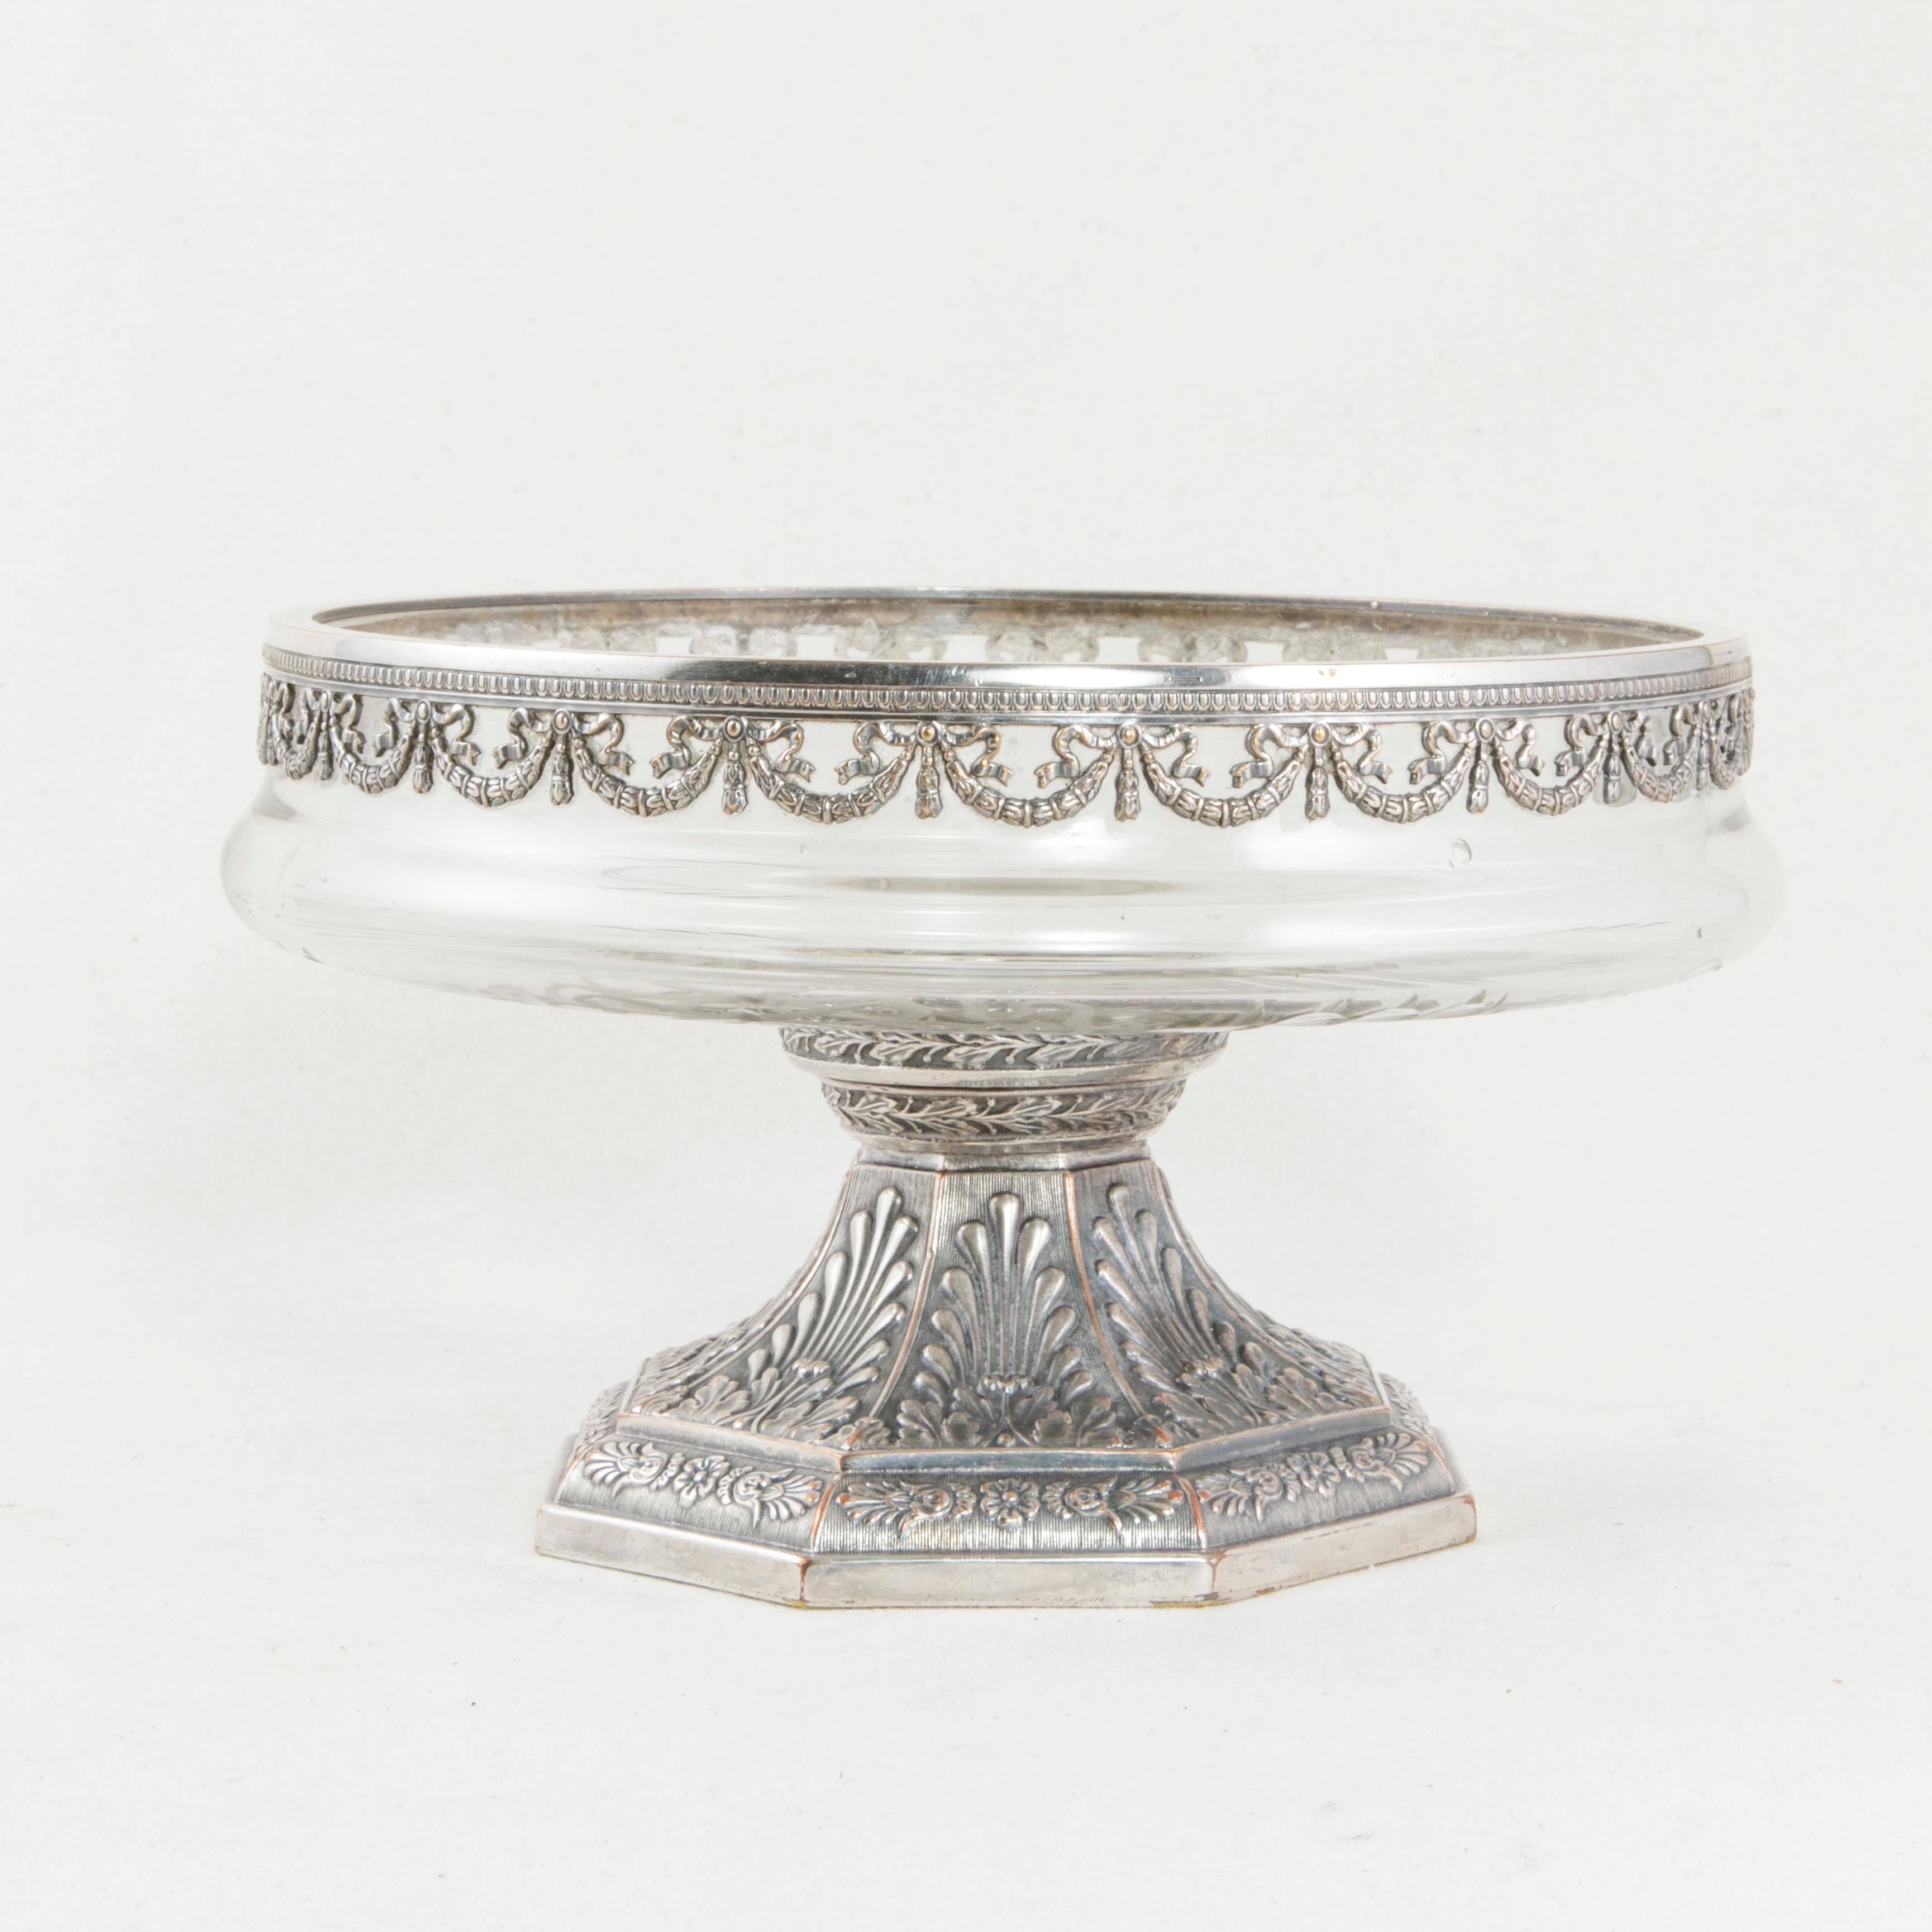 This early 20th century French Art Deco period etched crystal compote or serving dish features a silver plate footed base and rim displaying Classic Louis XVI motifs. The crystal bowl is detailed with etched knotted ribbons and flowers. A beaded